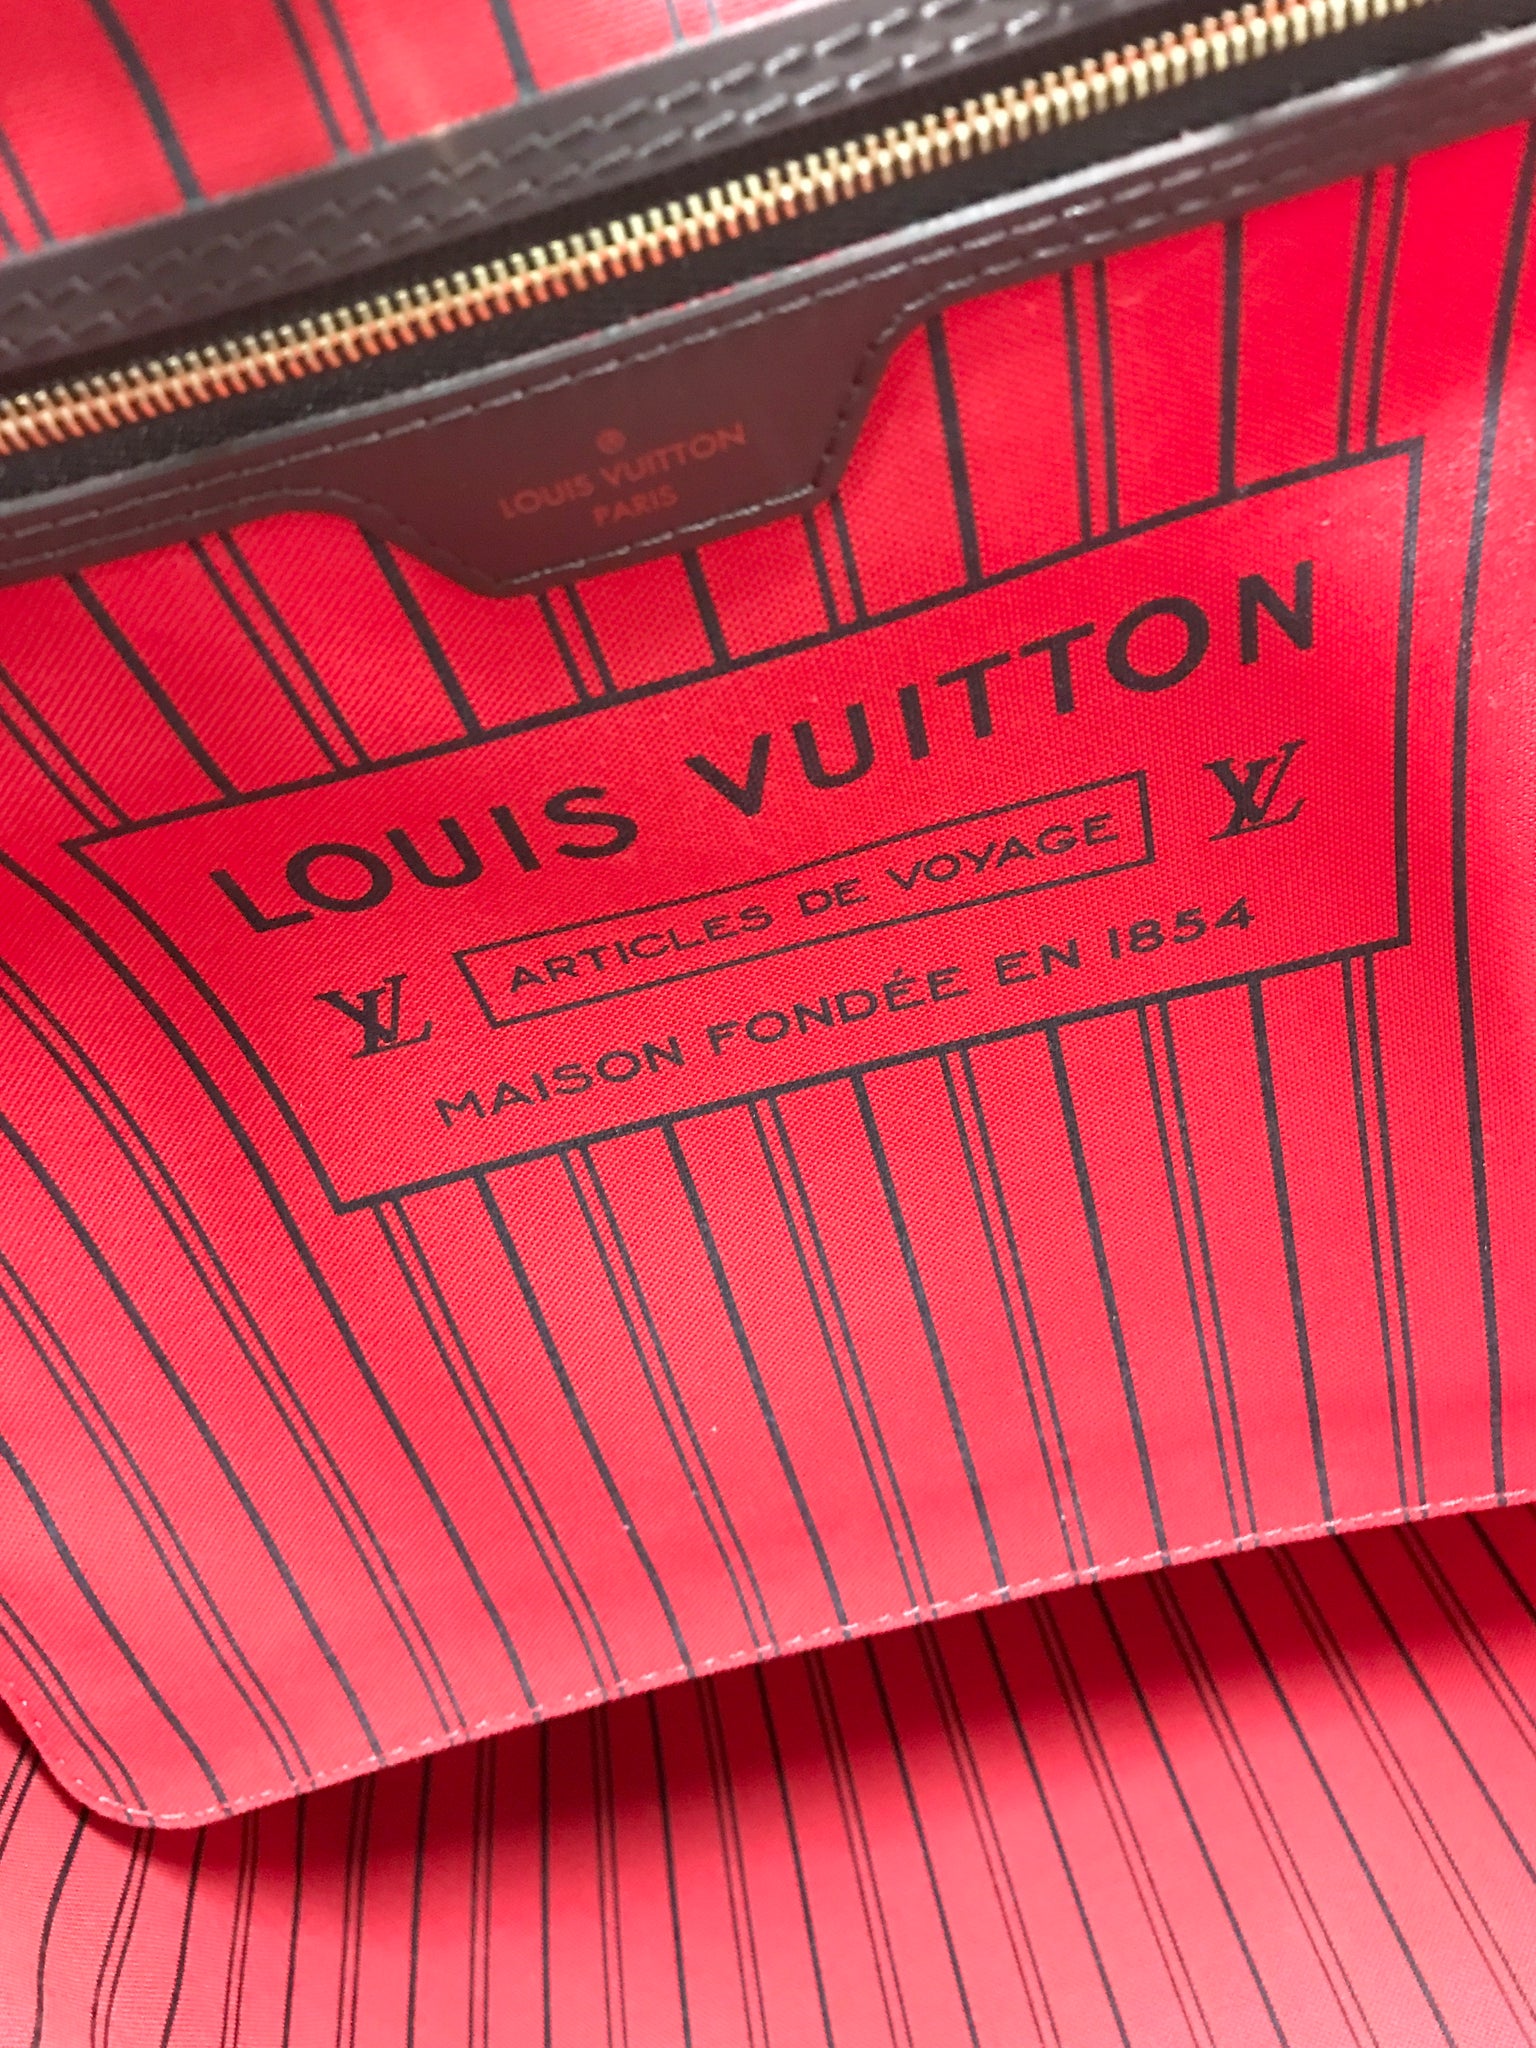 Authentic Louis Vuitton Used Damier Ebene NeverFull PM 2017 – Dop3